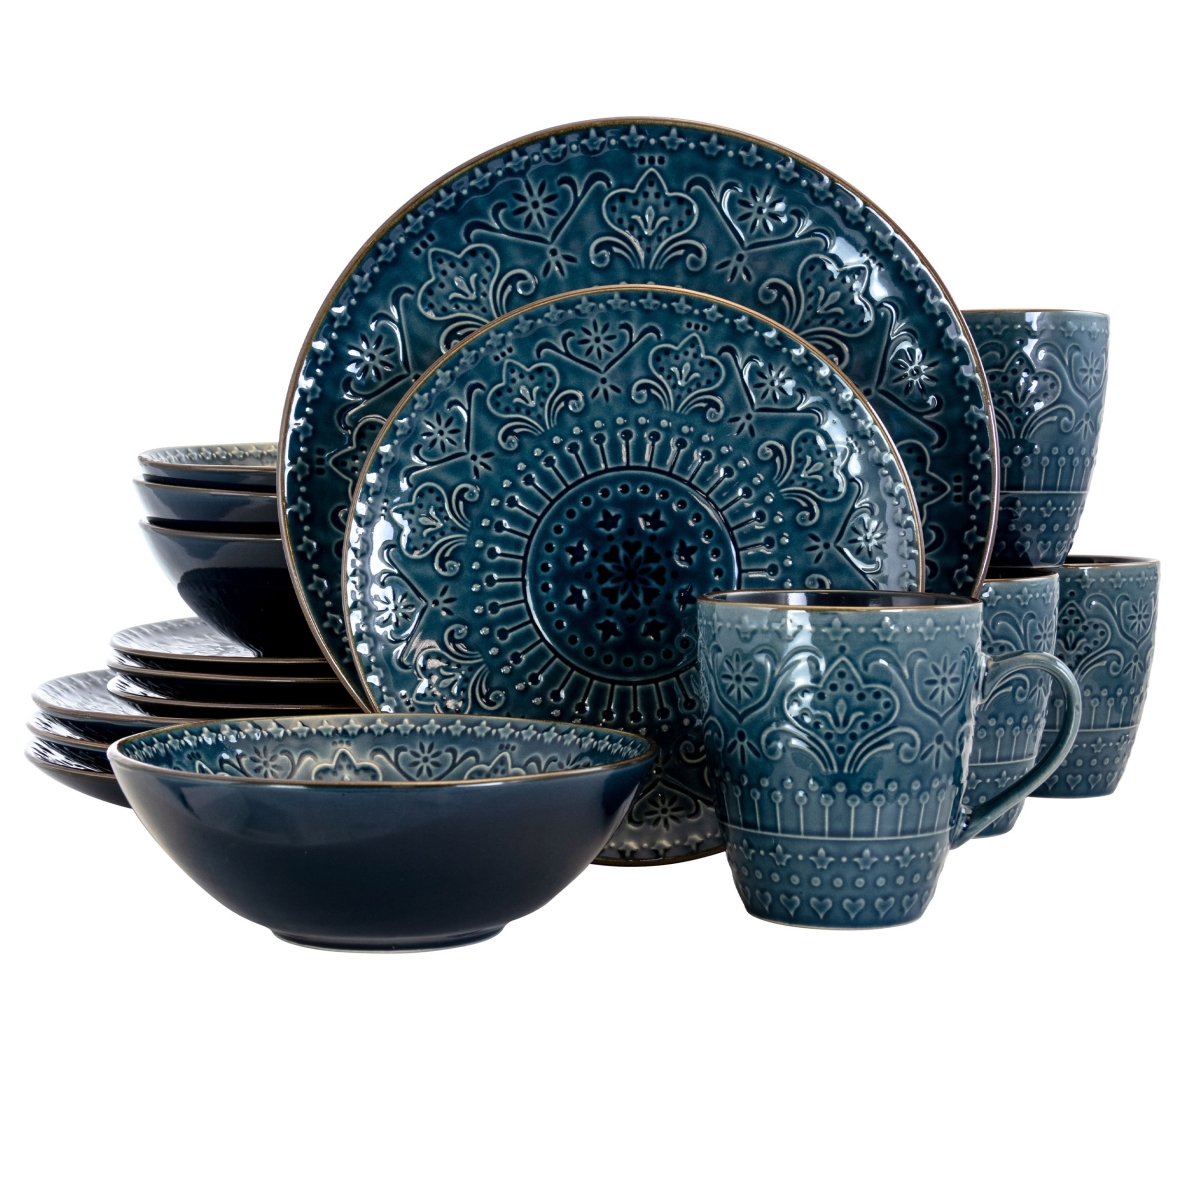 Picture of Elama EL-DEEPSEAMOZAIC Deep Sea Mozaic Luxurious Stoneware Dinnerware with Complete Setting for 4 - 16 Piece